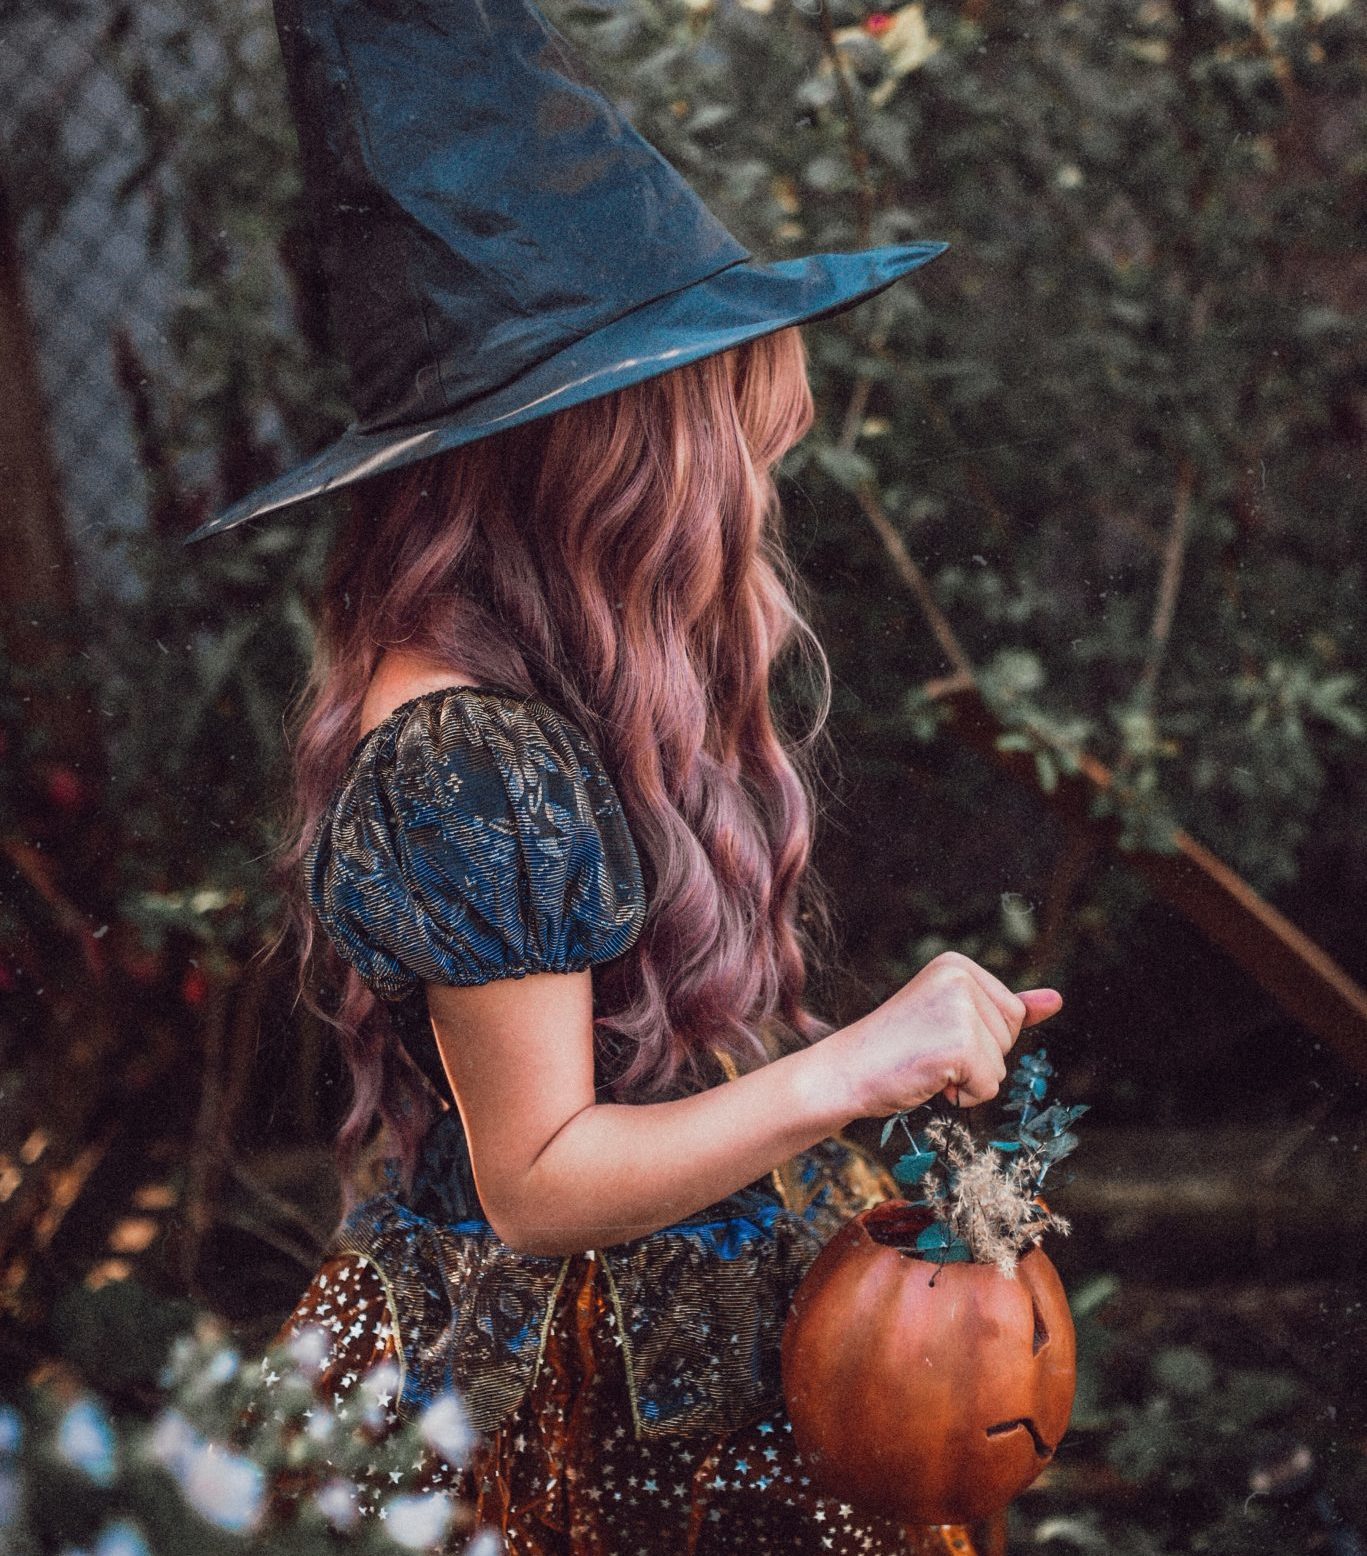 Person dressed up as a witch holding a pumpkin with flowers